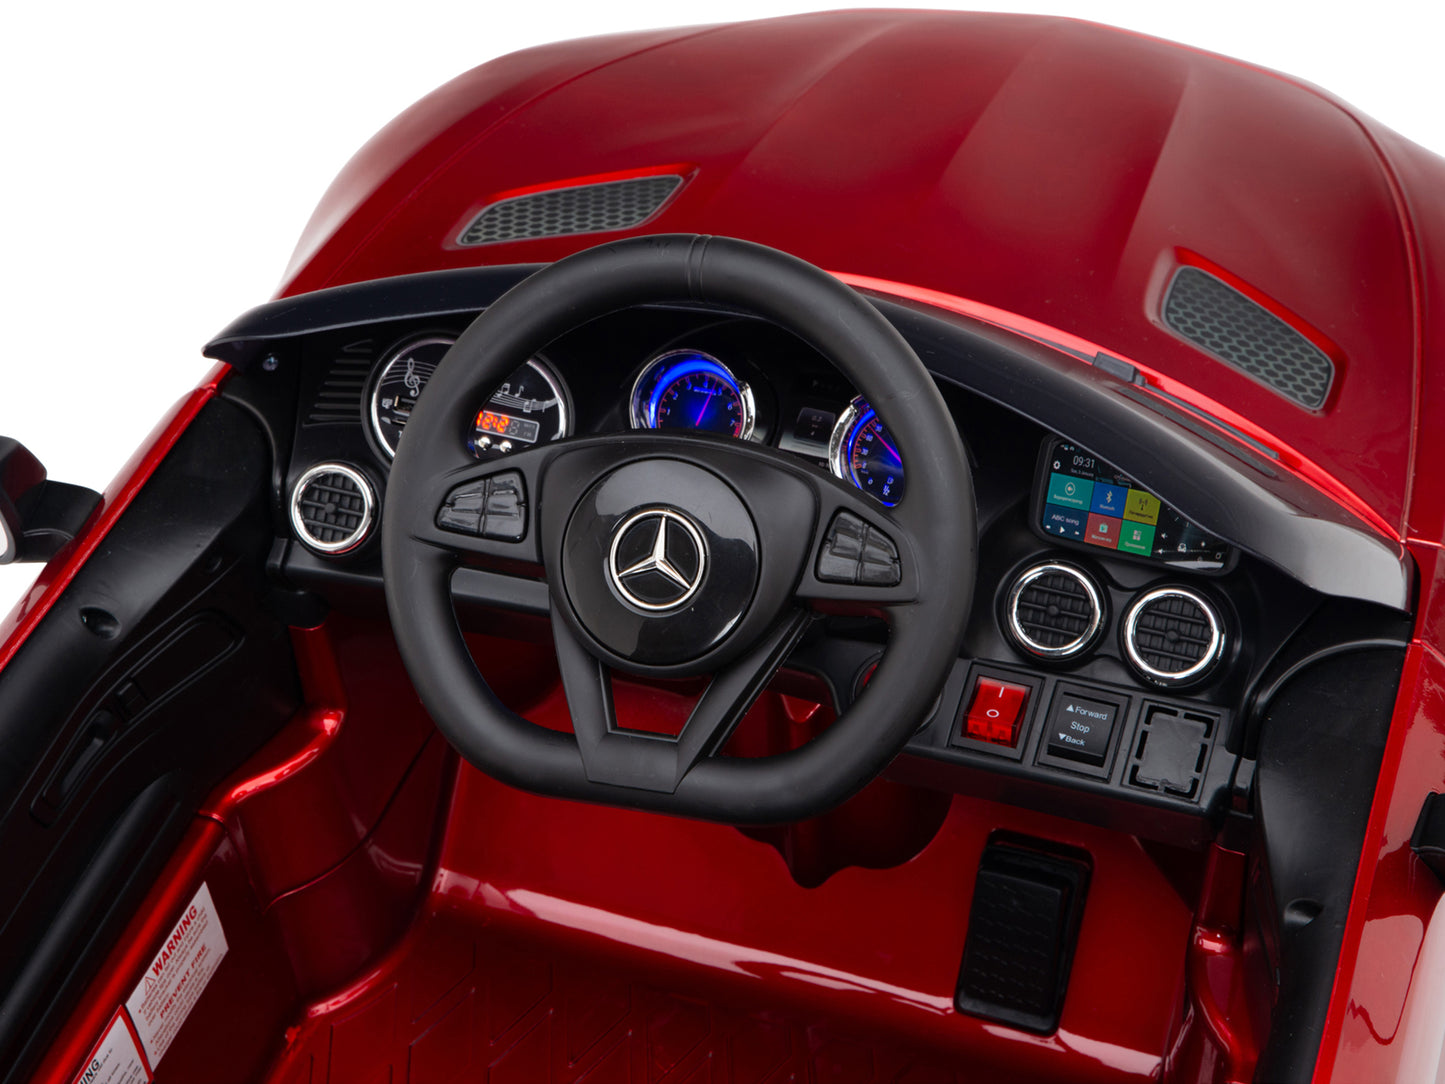 Mercedes-AMG GT Coupe 12V Battery Operated Ride On Car with Remote Control - Red